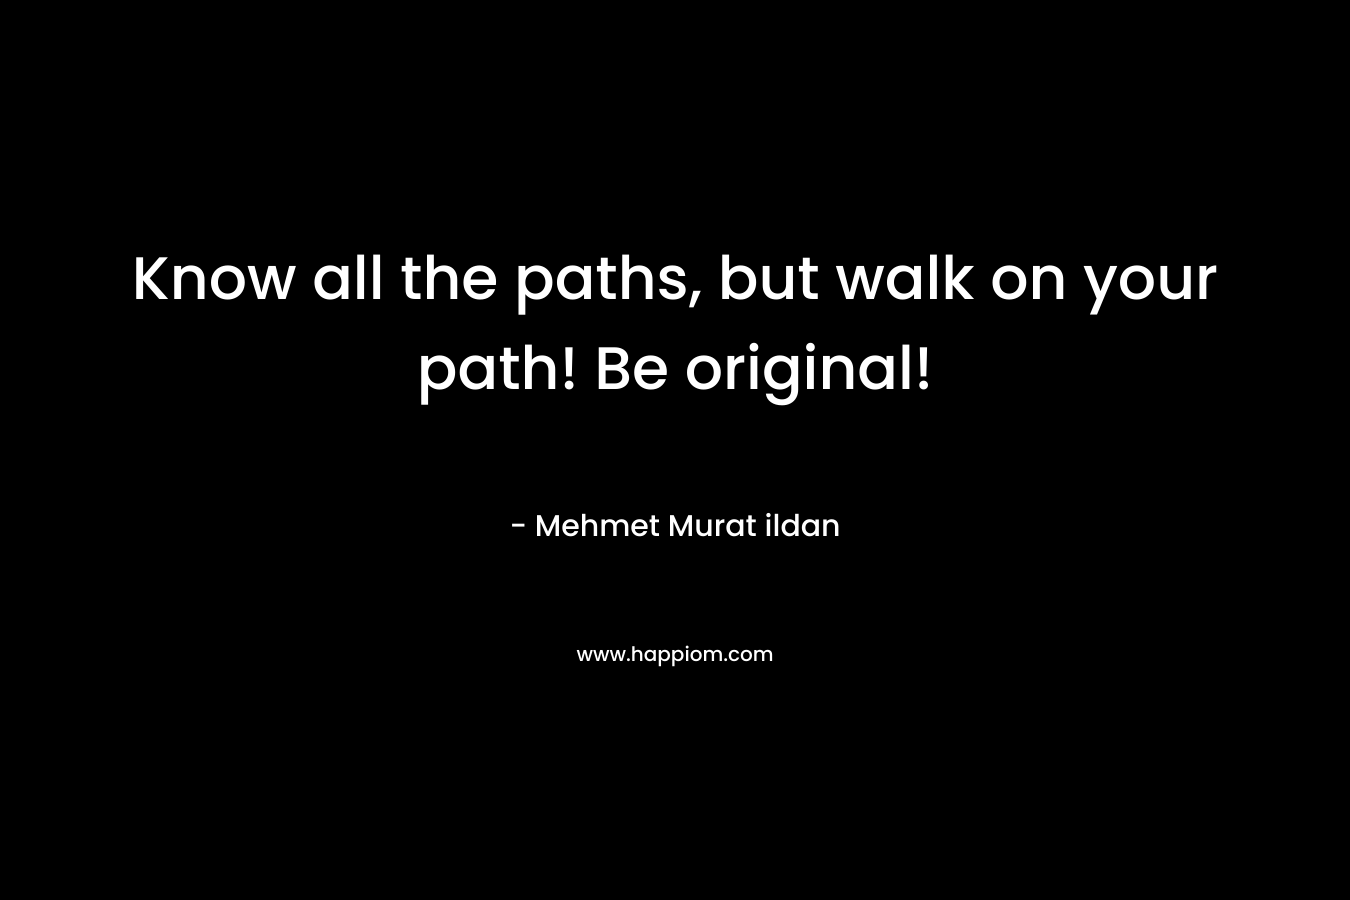 Know all the paths, but walk on your path! Be original!